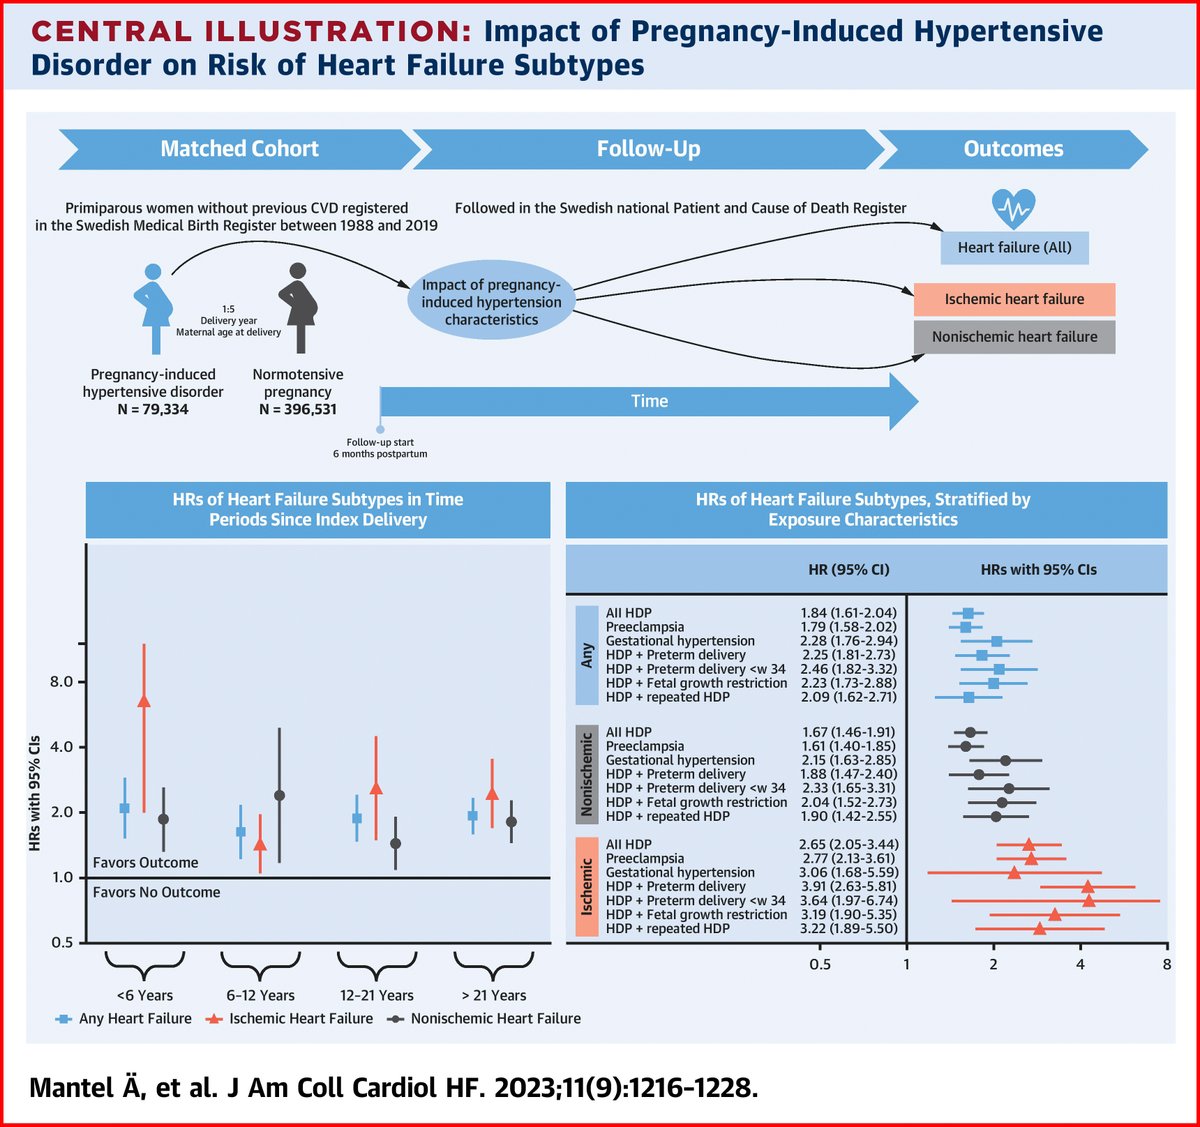 Pregnancy-induced hypertensive disorders increase the risk of #HeartFailure (HF) in the short and long term, especially ischemic HF. Learn more in #JACCHF: bit.ly/3t17XMo #CVD #CardioObstetrics #ACCCardioOB #CardioTwitter @karolinskainst @KarolinskaUnsju @AnglaMantel